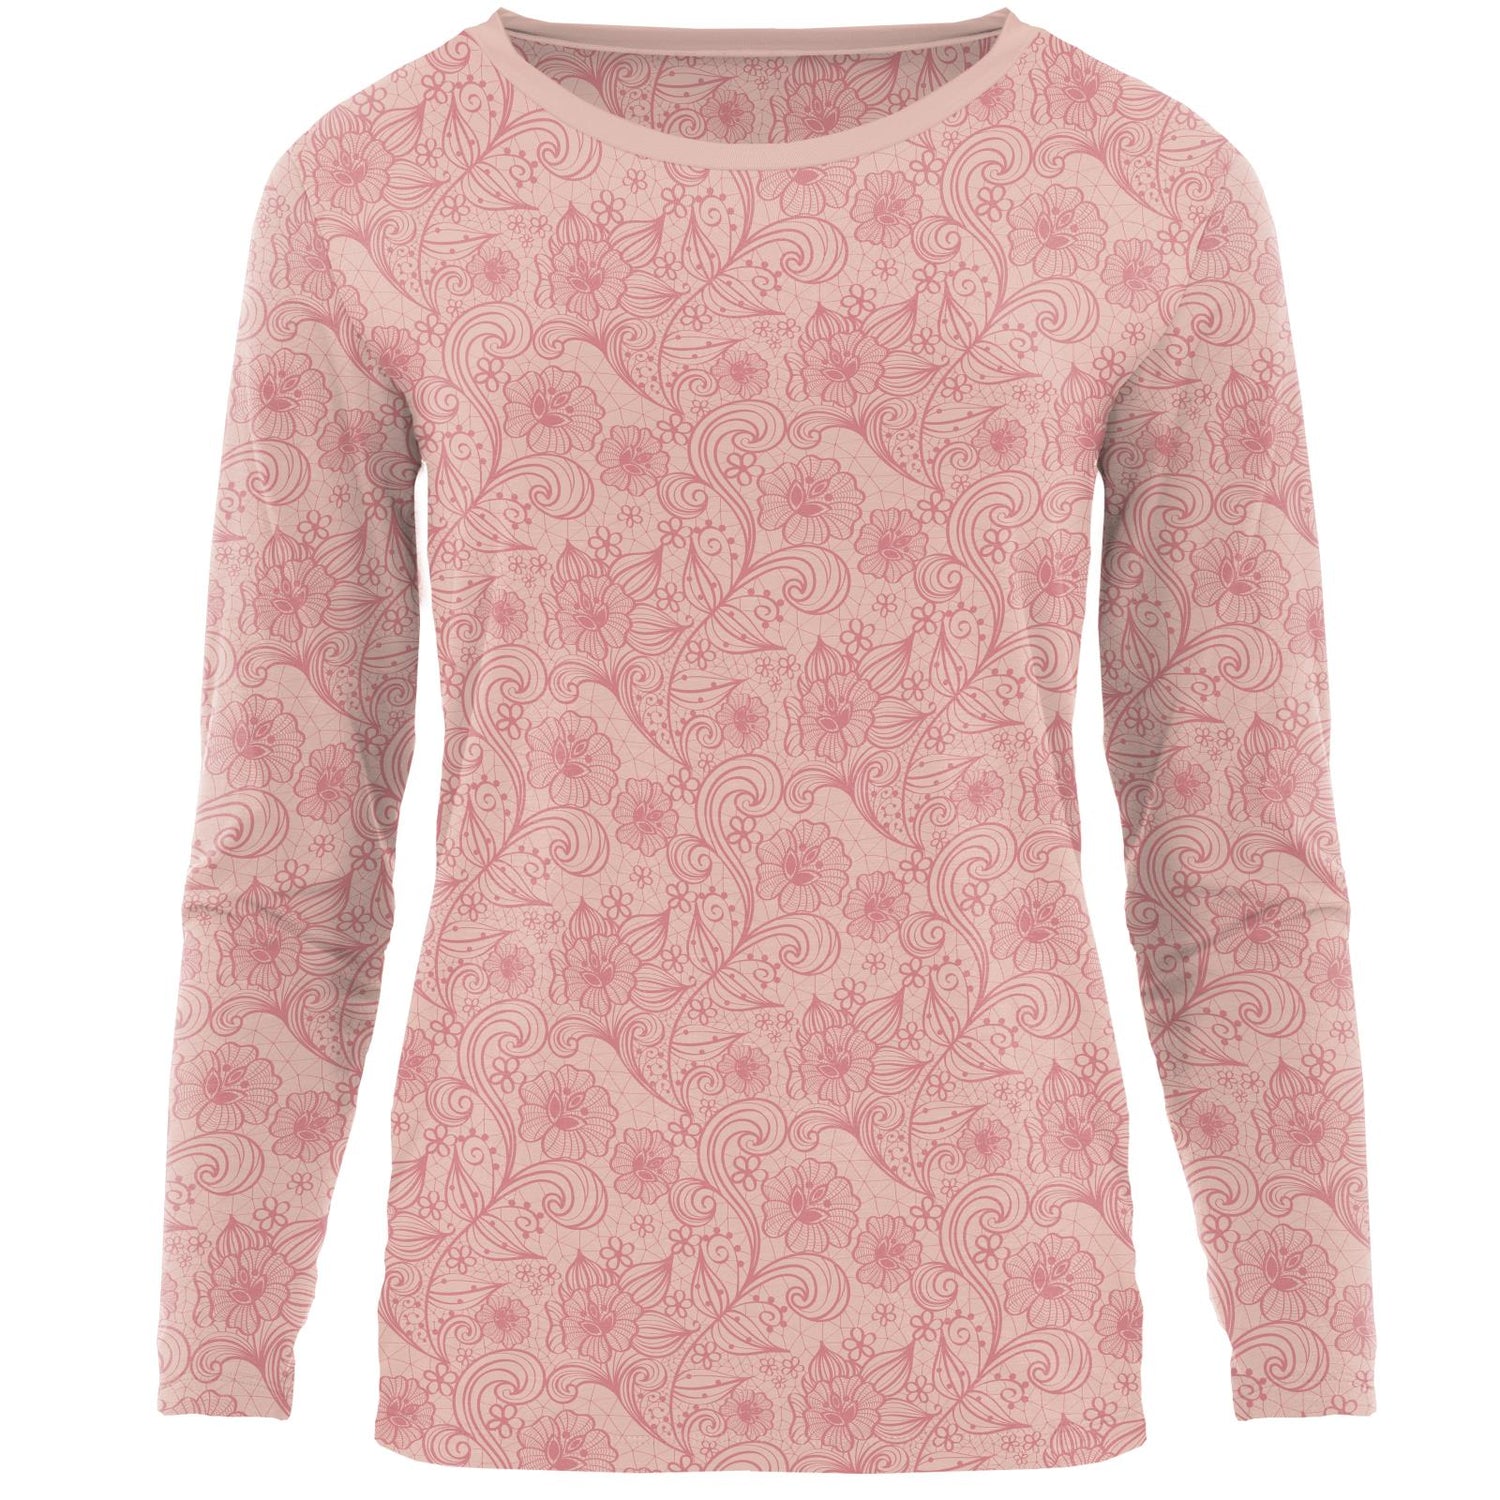 Women's Print Long Sleeve Loosey Goosey Tee in Peach Blossom Lace